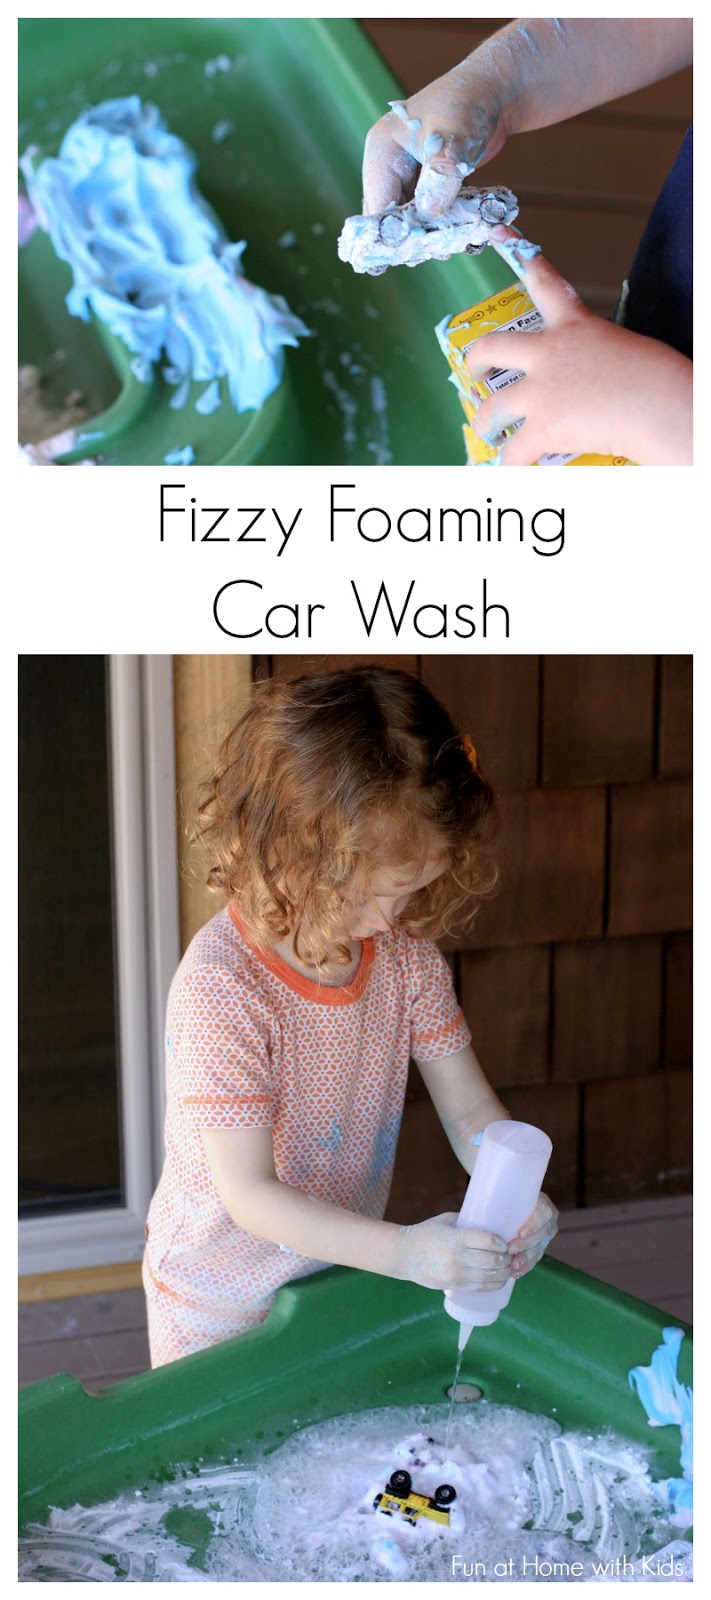 Three Step Fizzy Foaming Car Wash - a fun outdoor (or indoor) activity!  Includes a fun trick for masking that vinegar smelll.  From Fun at Home with Kids